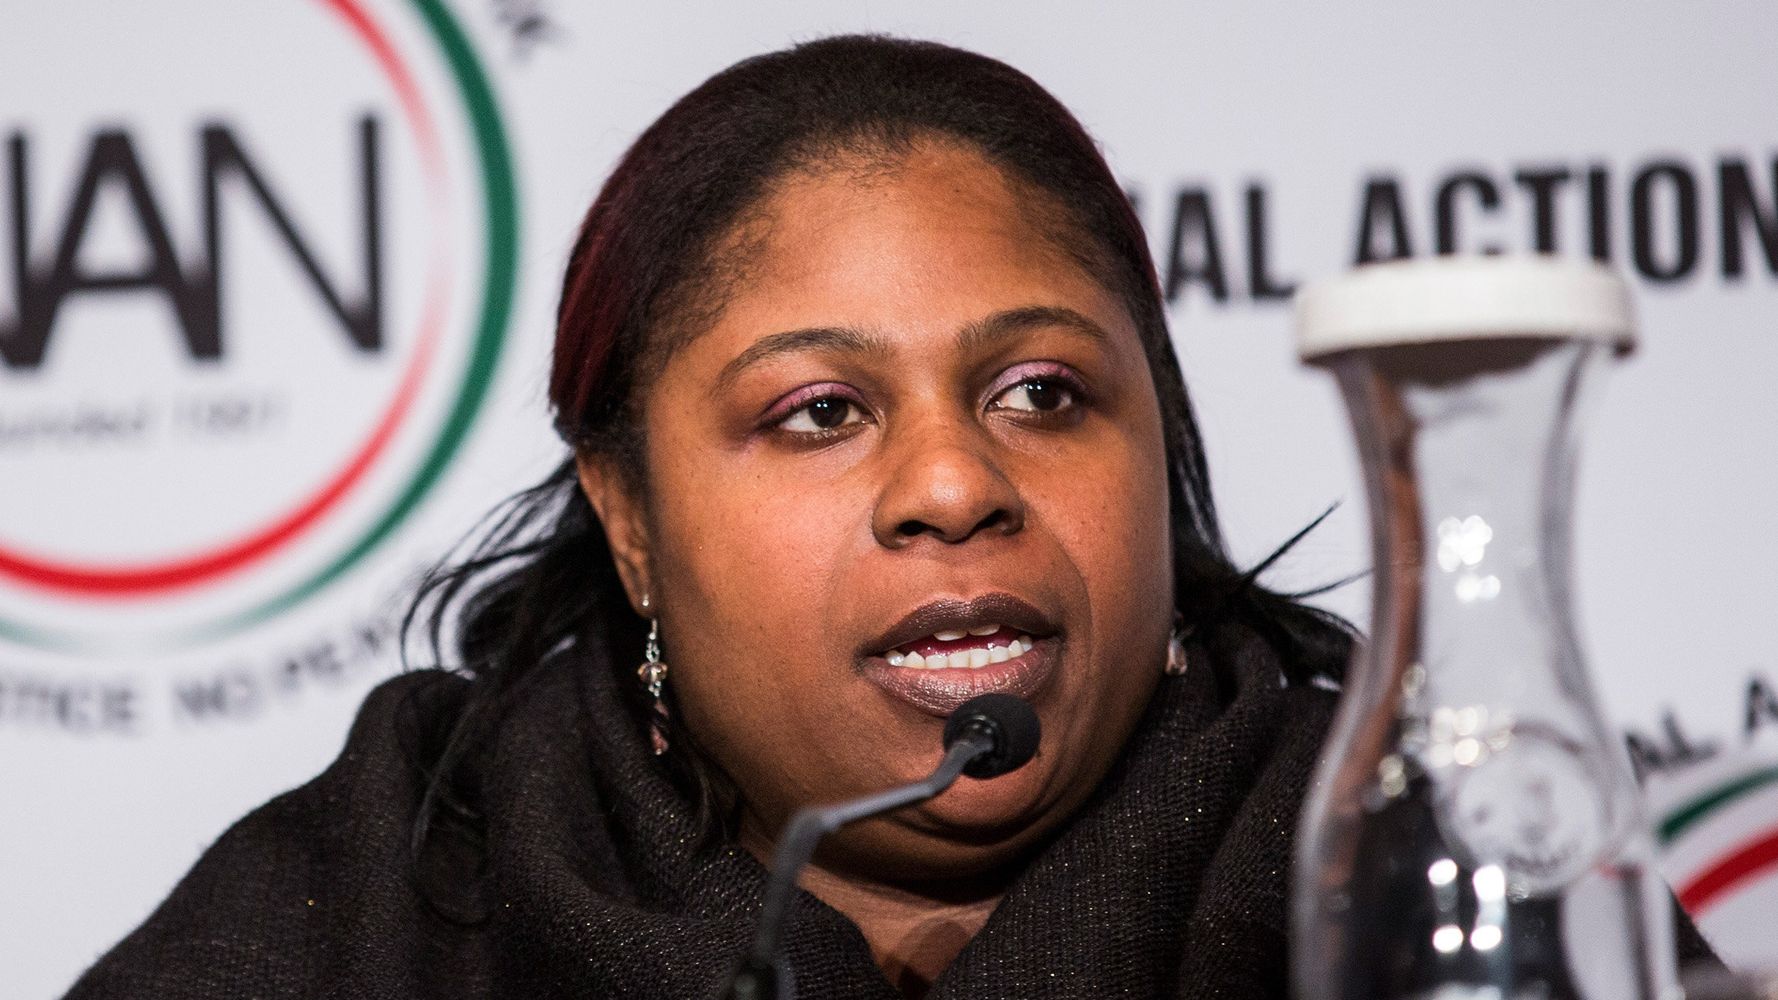 Tamir Rice's Mother Is Opening A Youth Center To Honor Her Son's Memory